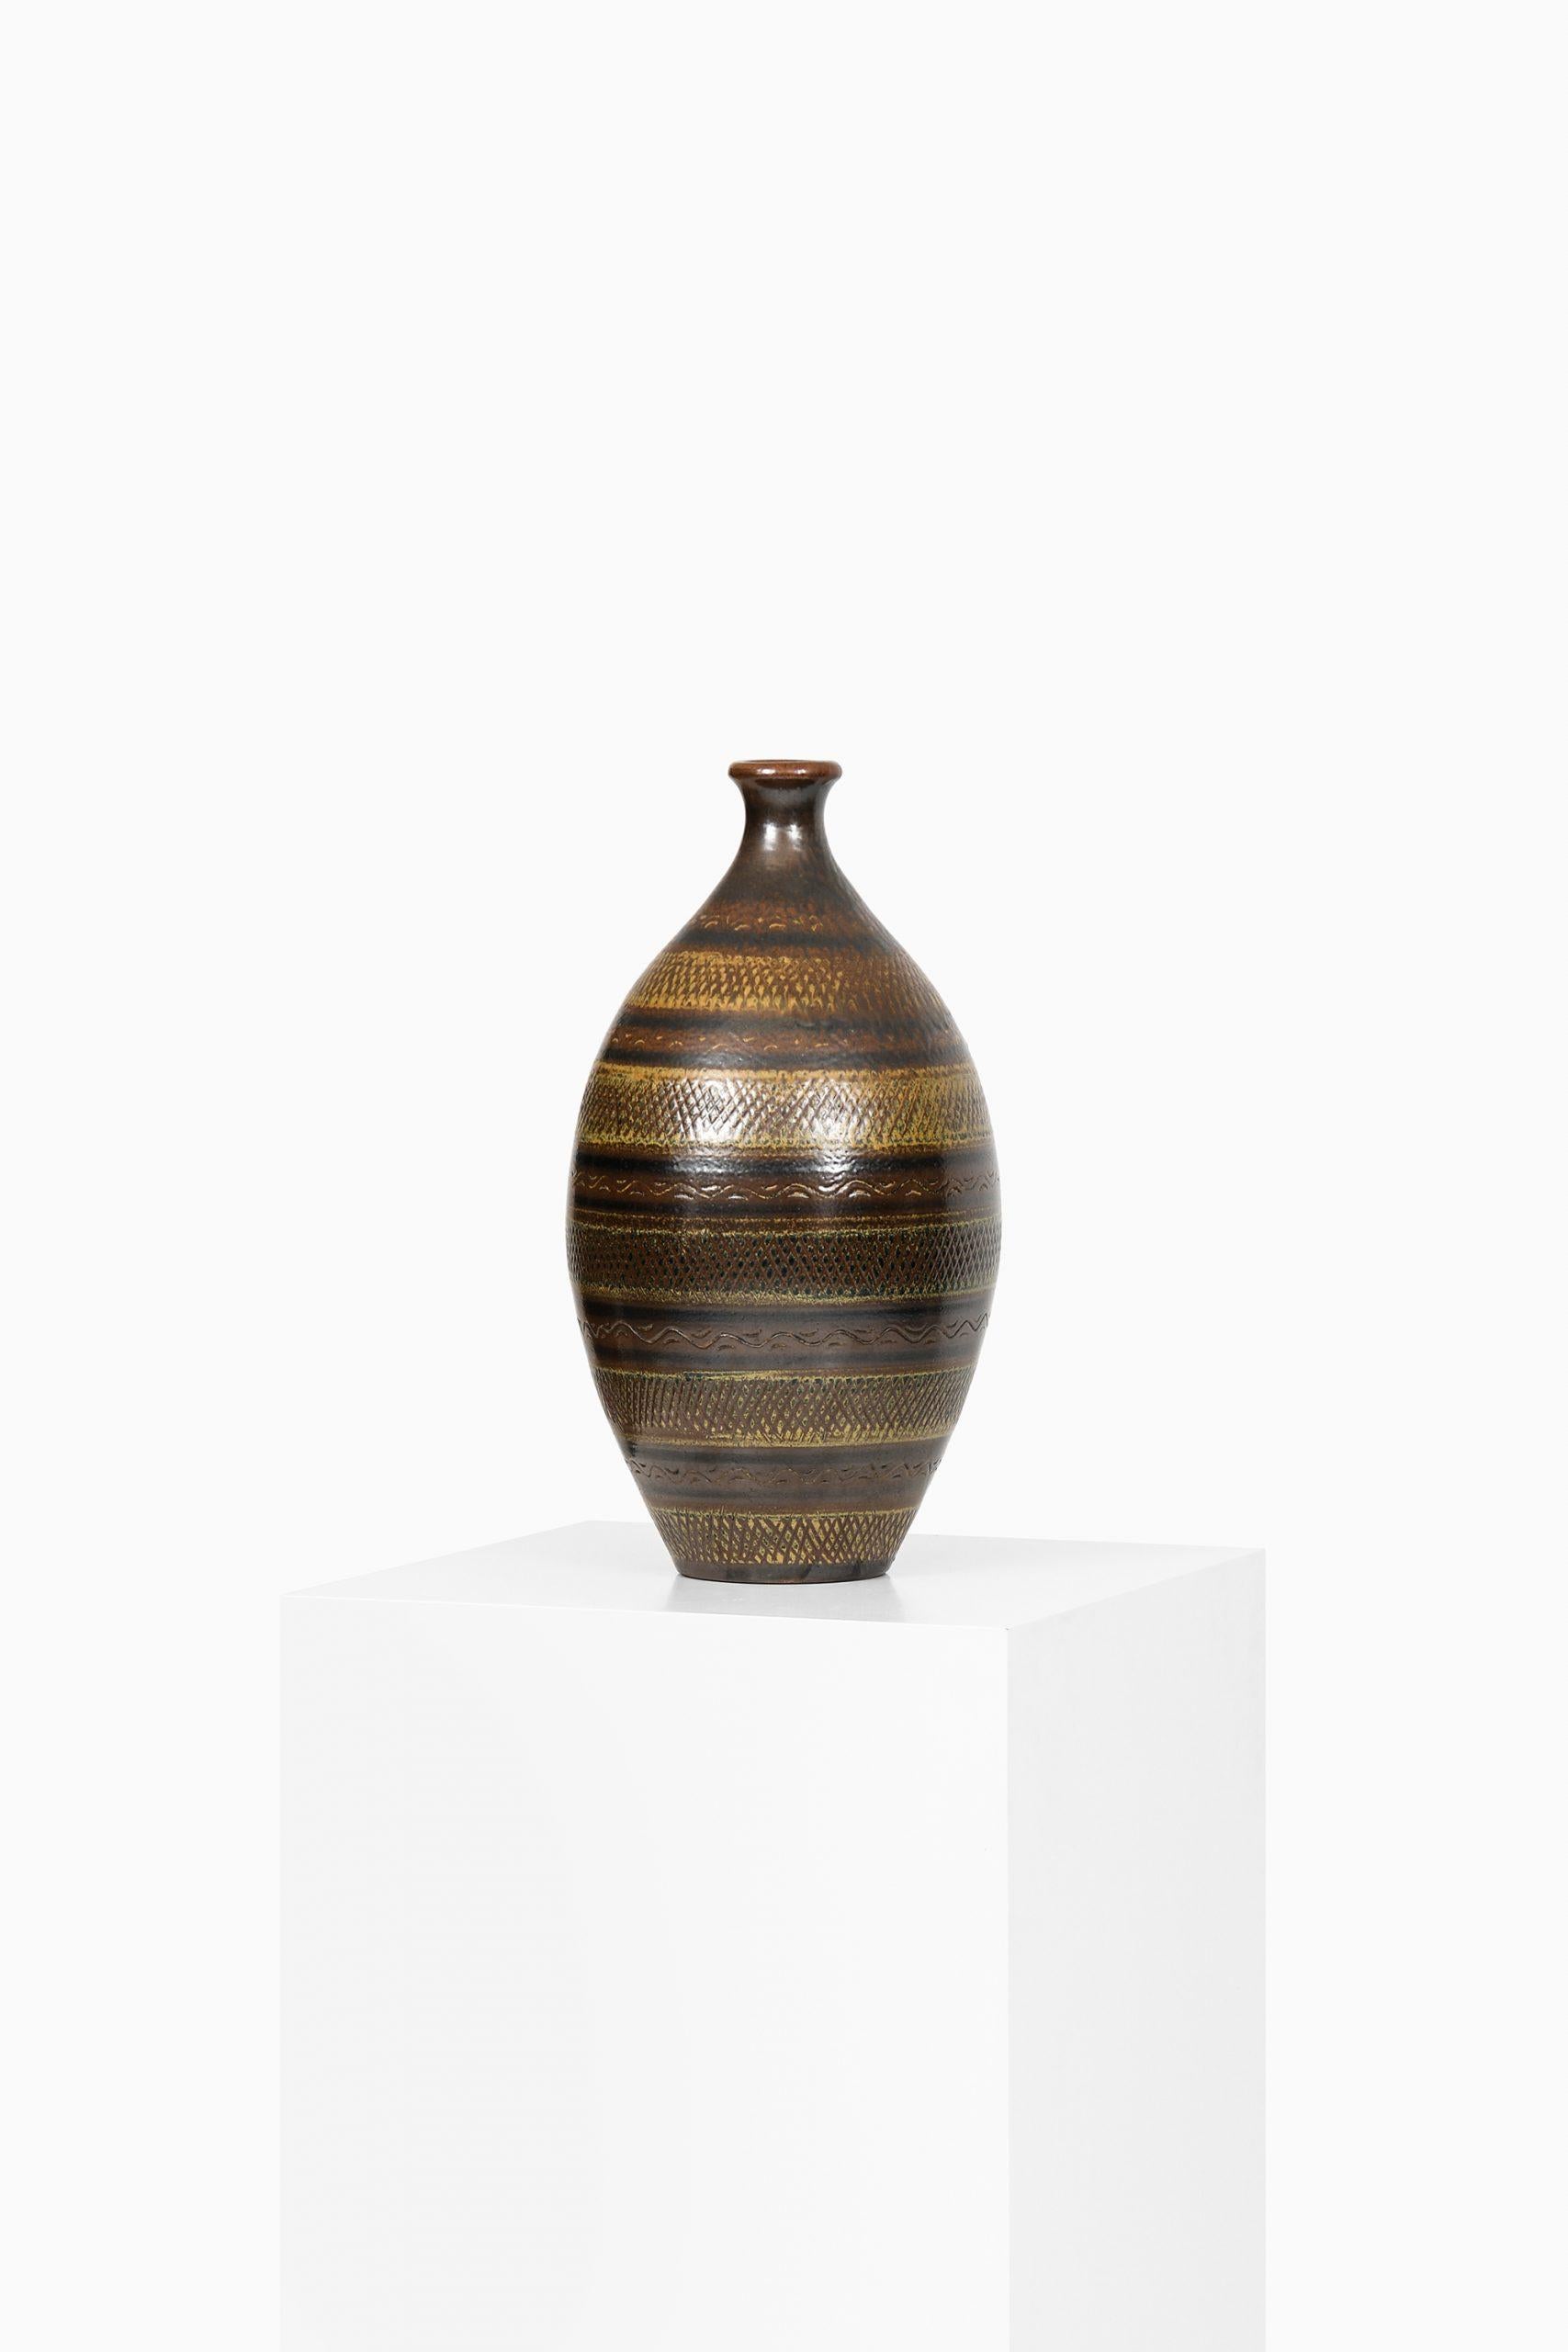 Rare floor vase designed by Arthur Andersson. Produced by Wallåkra in Sweden.